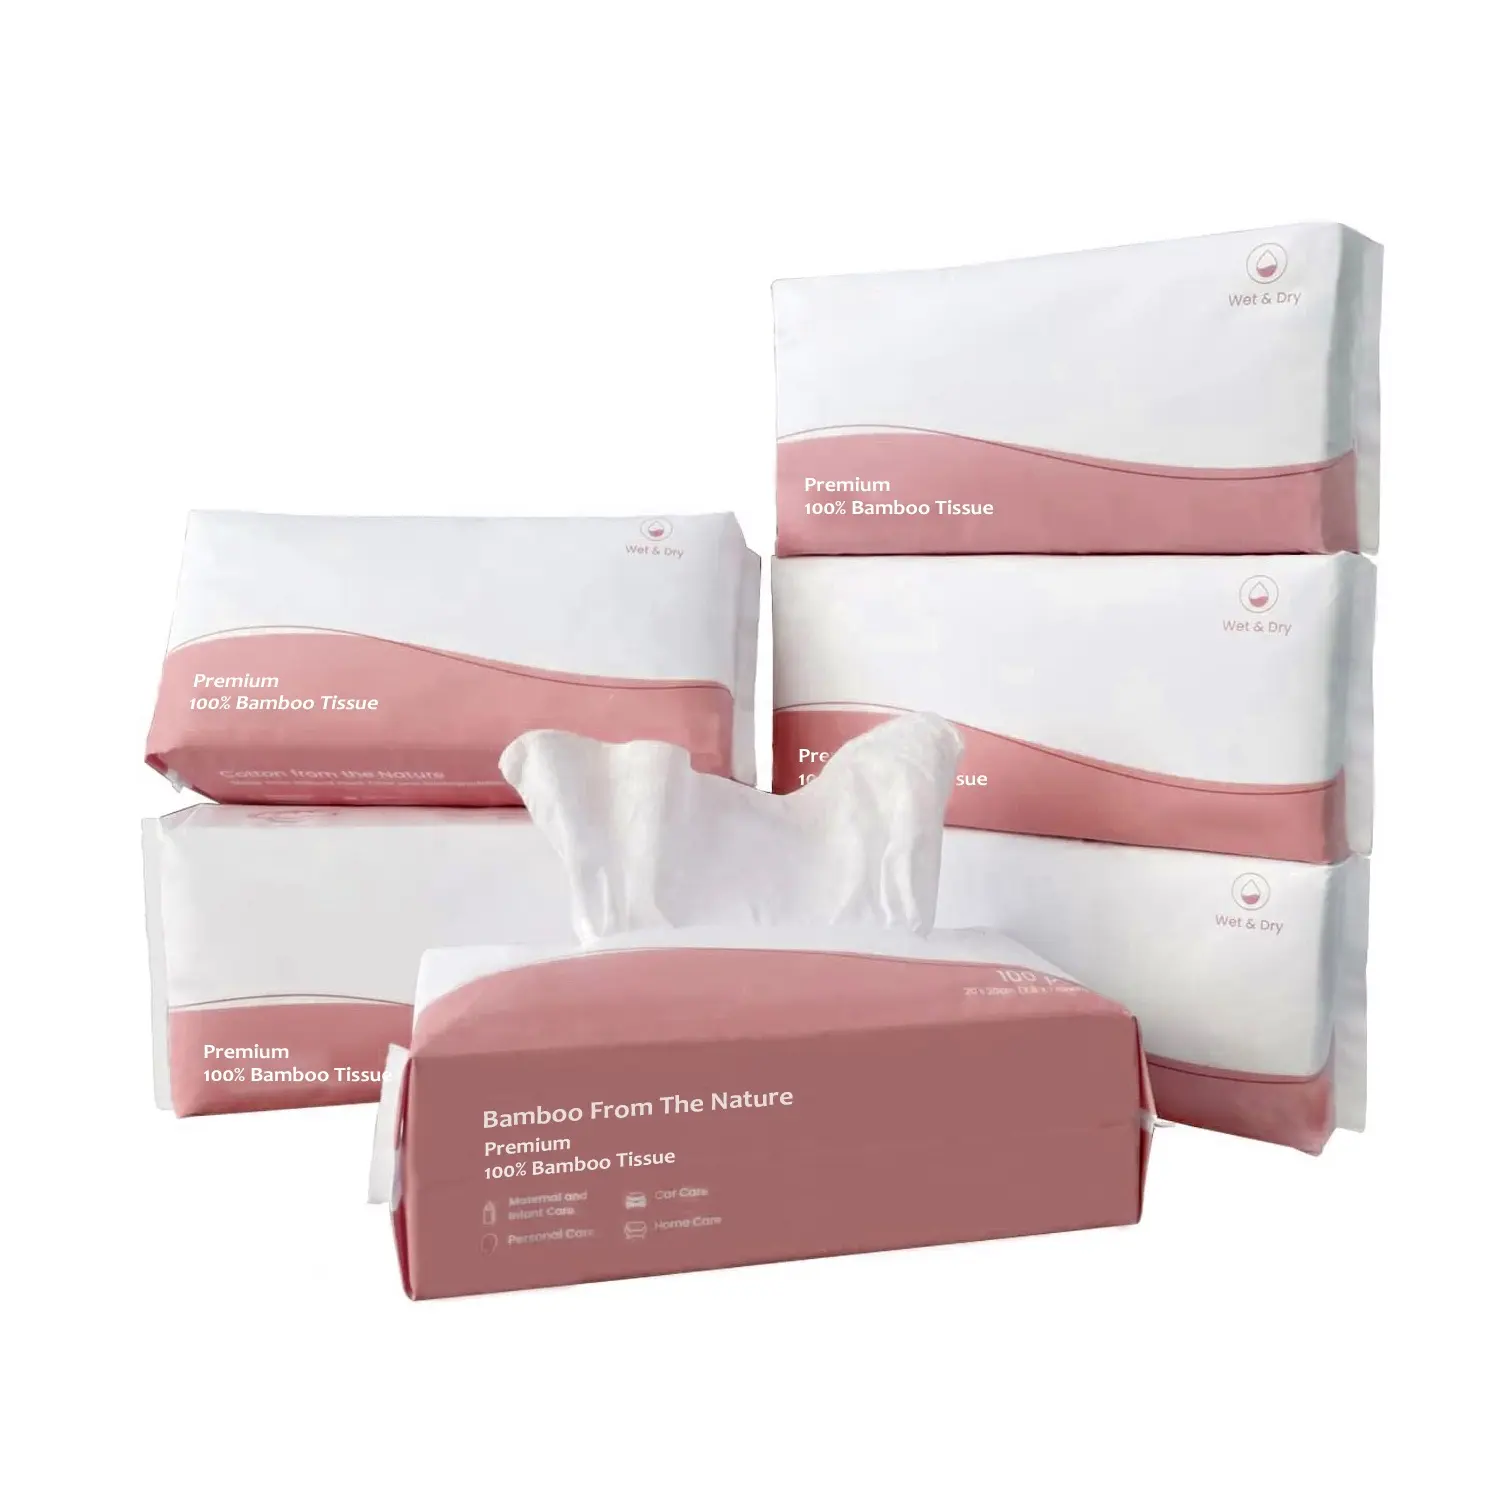 New Product Listing Hotel Travel White 100% Virgin Wood Pulp Soft Touch Cheap Facial Tissue